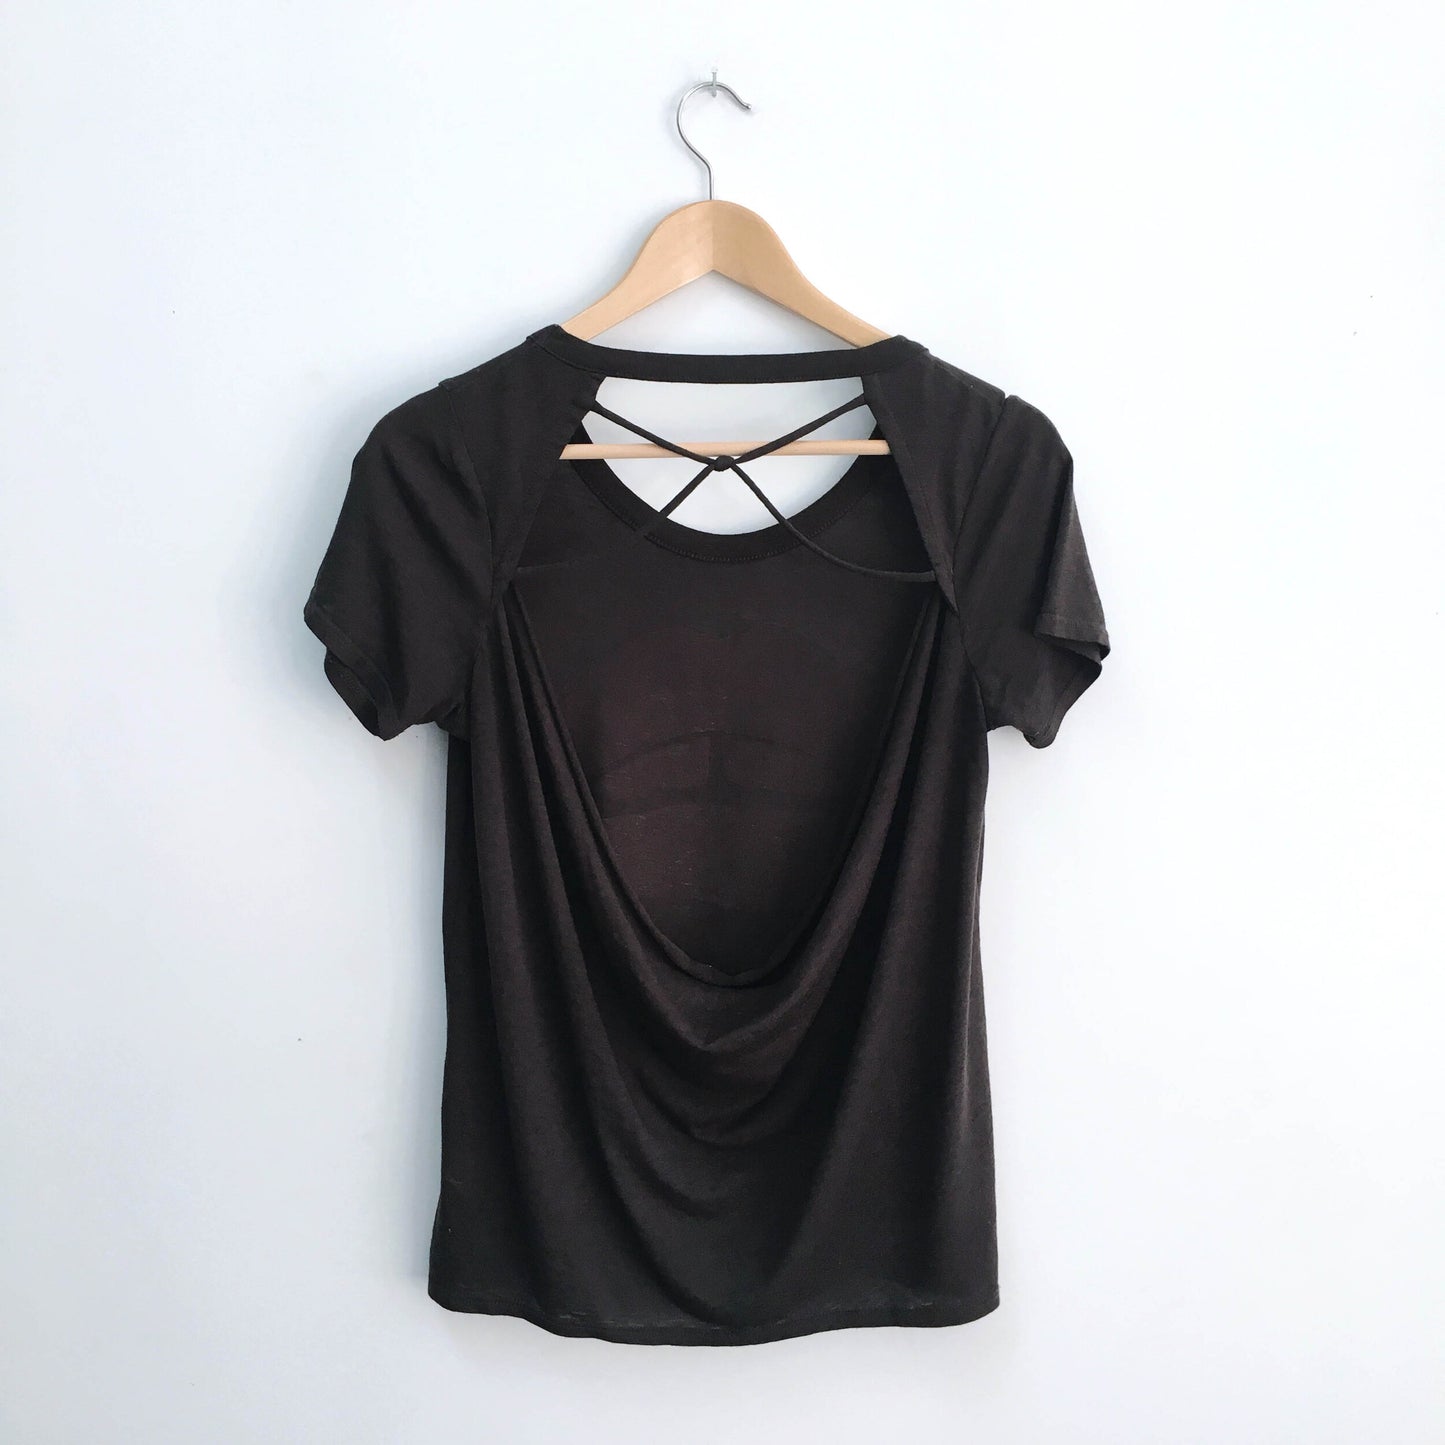 CHASER big lips open back tee - size xs